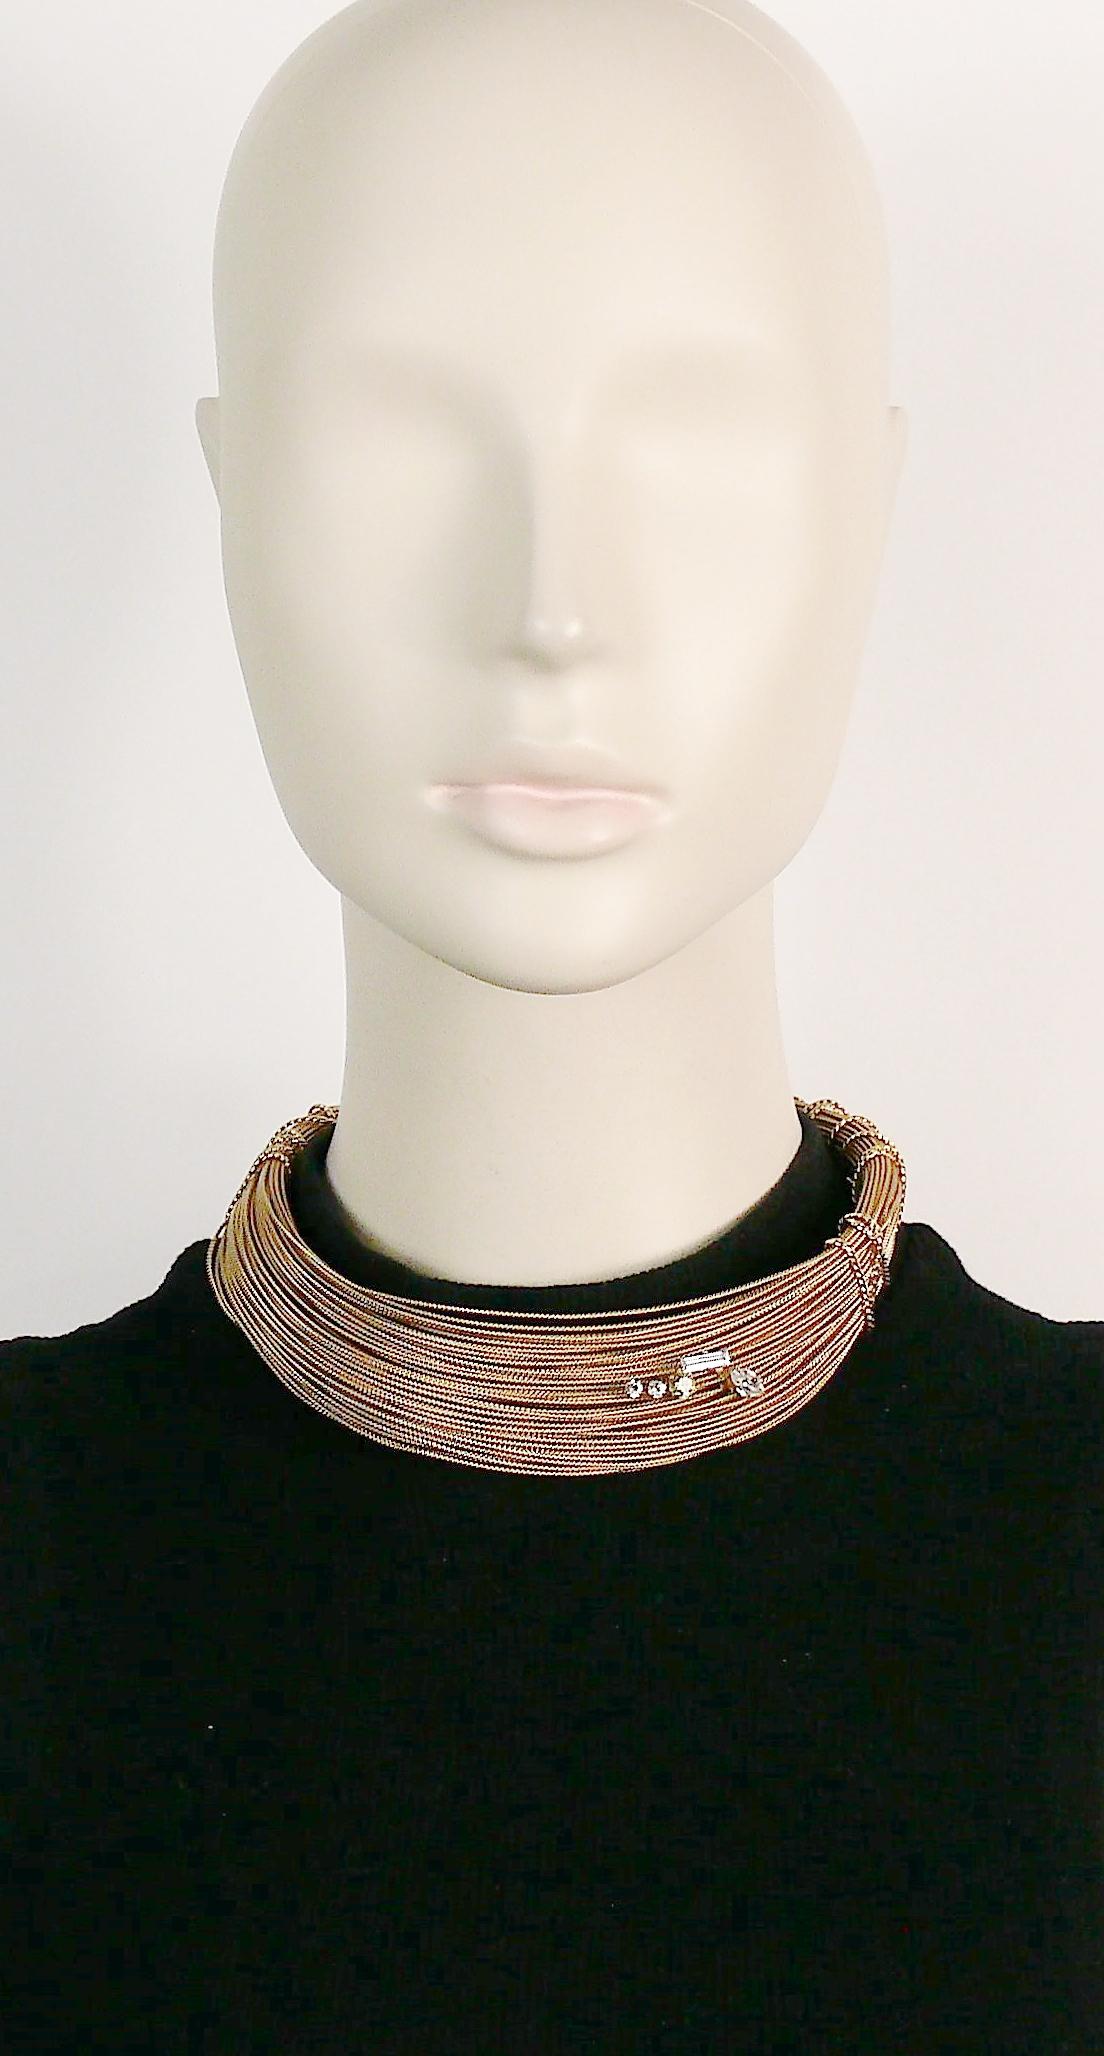 CHRISTIAN LACROIX vintage gold toned choker necklace made of bundled textured wires with faceted crystals embellishment.

Embossed CL on the opening.

Indicative measurements : max. height approx. 2.6 cm (1.02 inches).
Adjustable from small to